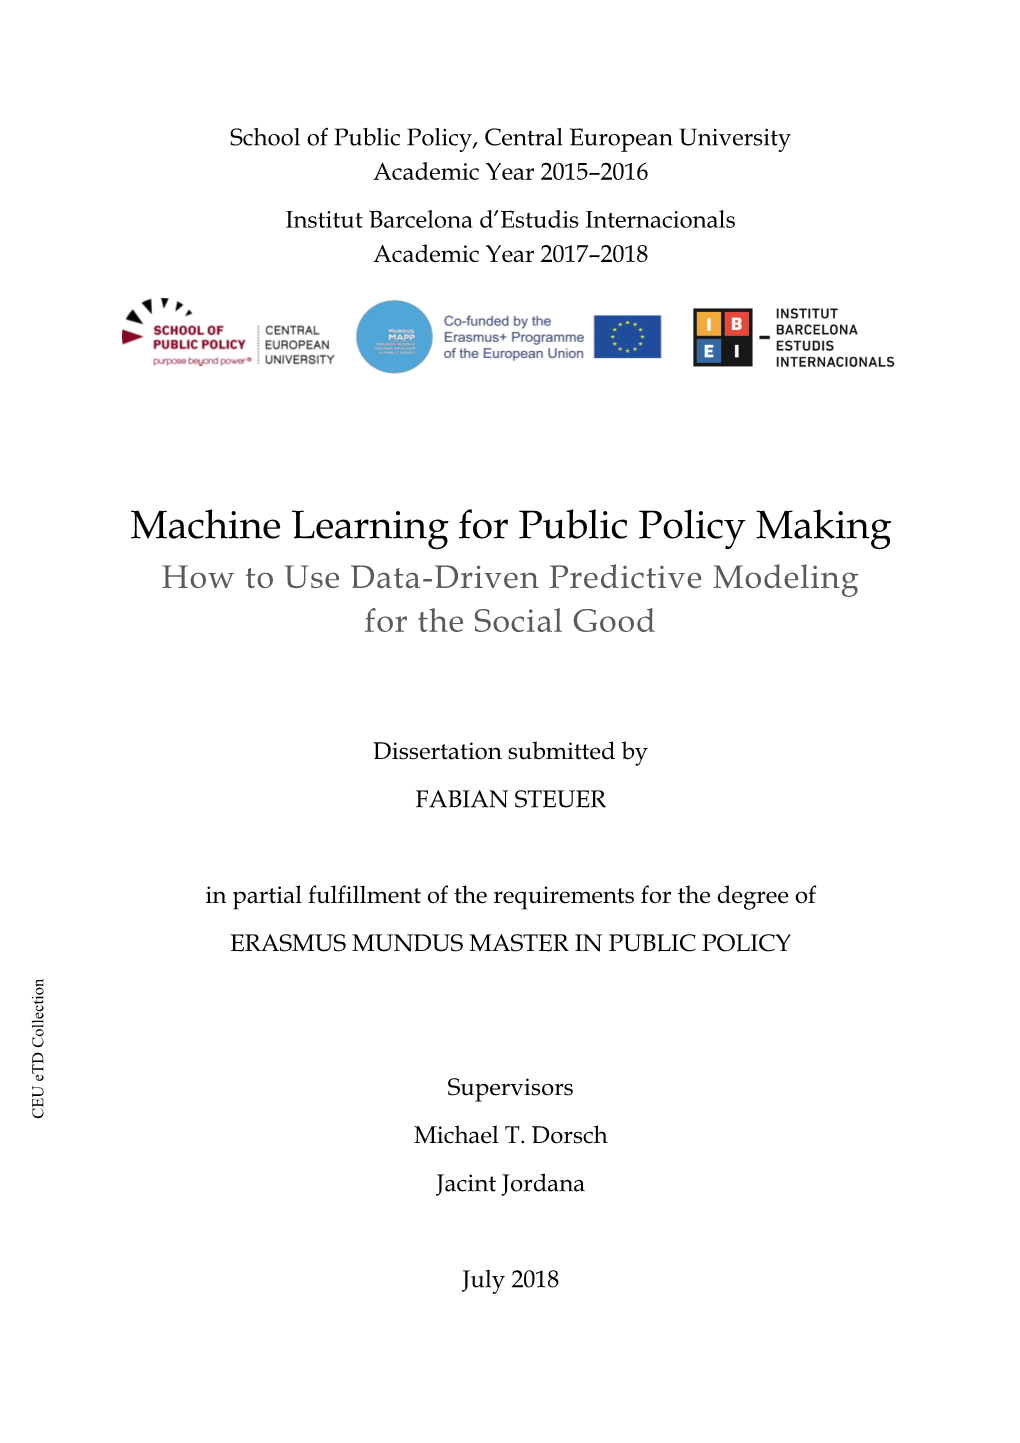 Machine Learning for Public Policy Making How to Use Data-Driven Predictive Modeling for the Social Good